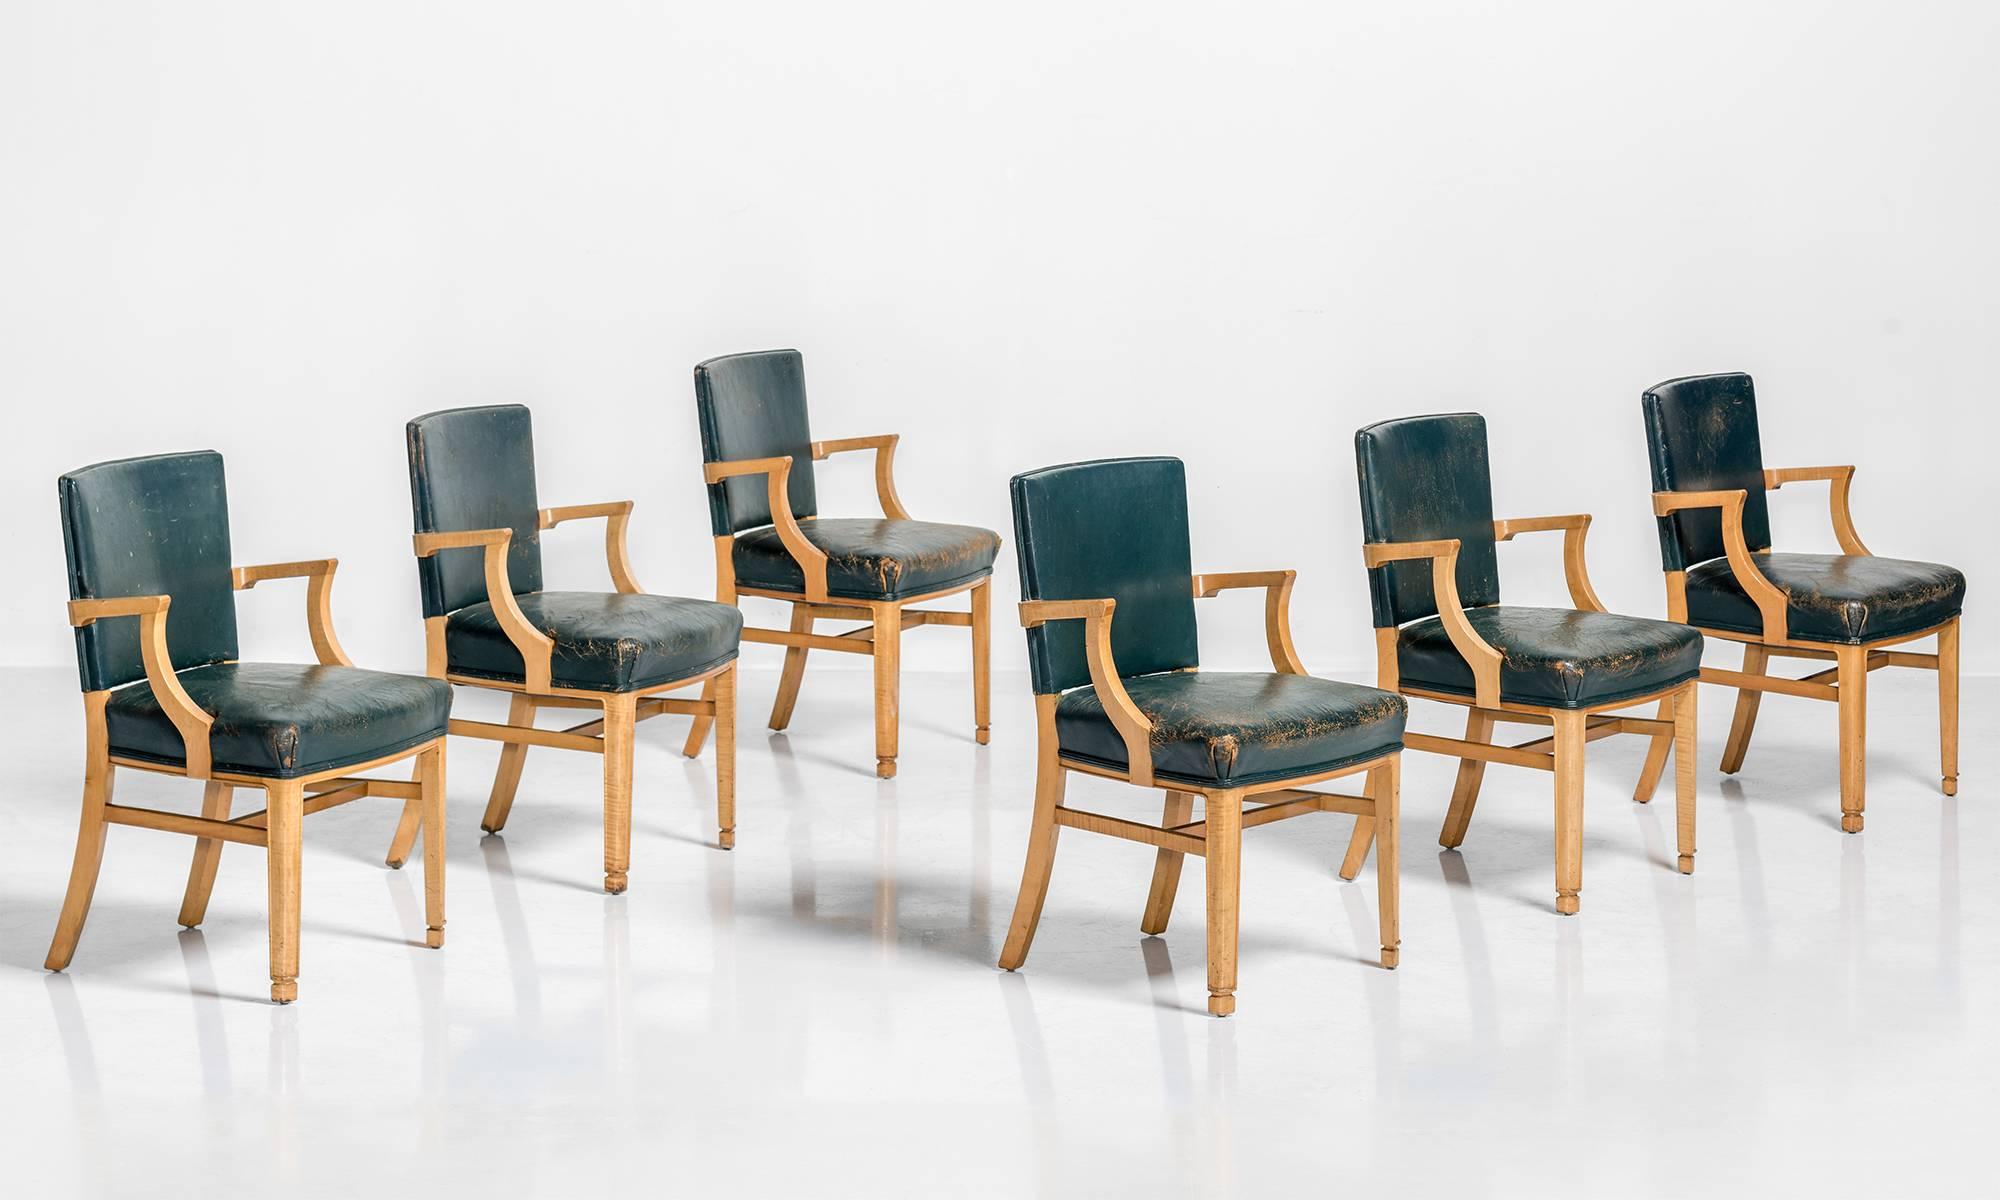 Set of six leather and maple wood dining chairs, circa 1940

Original blue or green leather upholstery on maple legs.